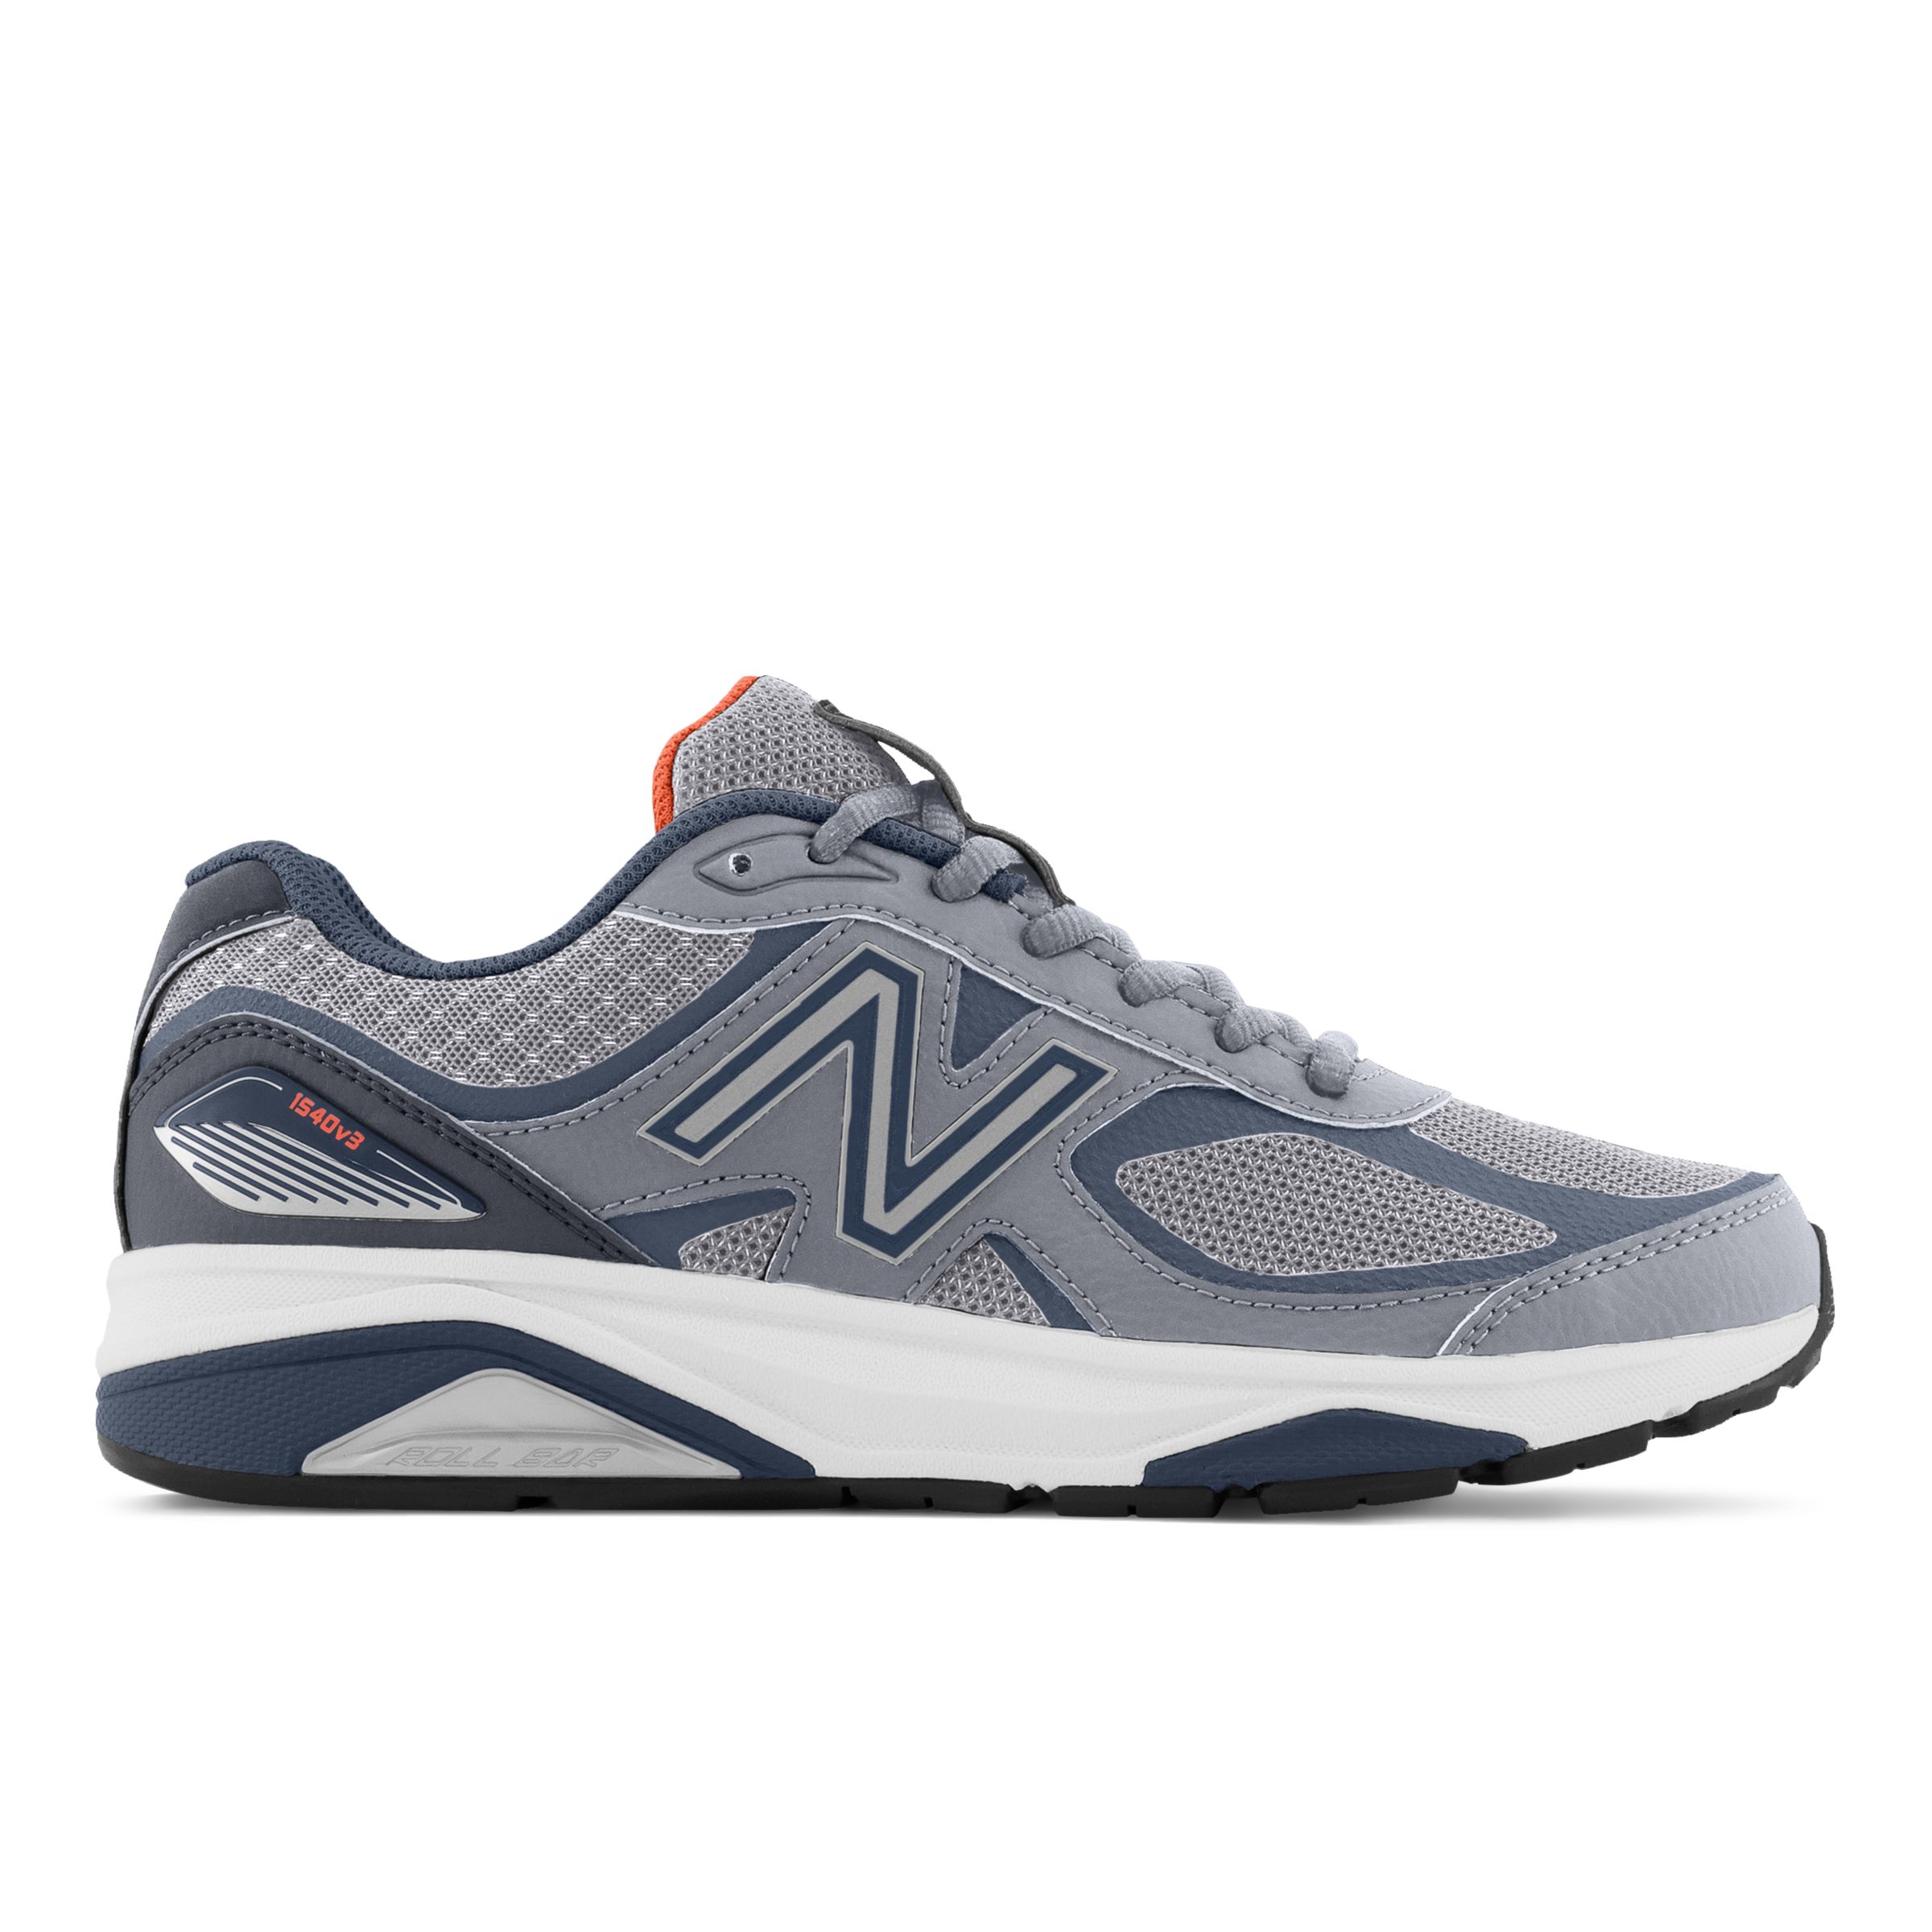 new balance 475 women sneakers Online Shopping mall | Find the ...